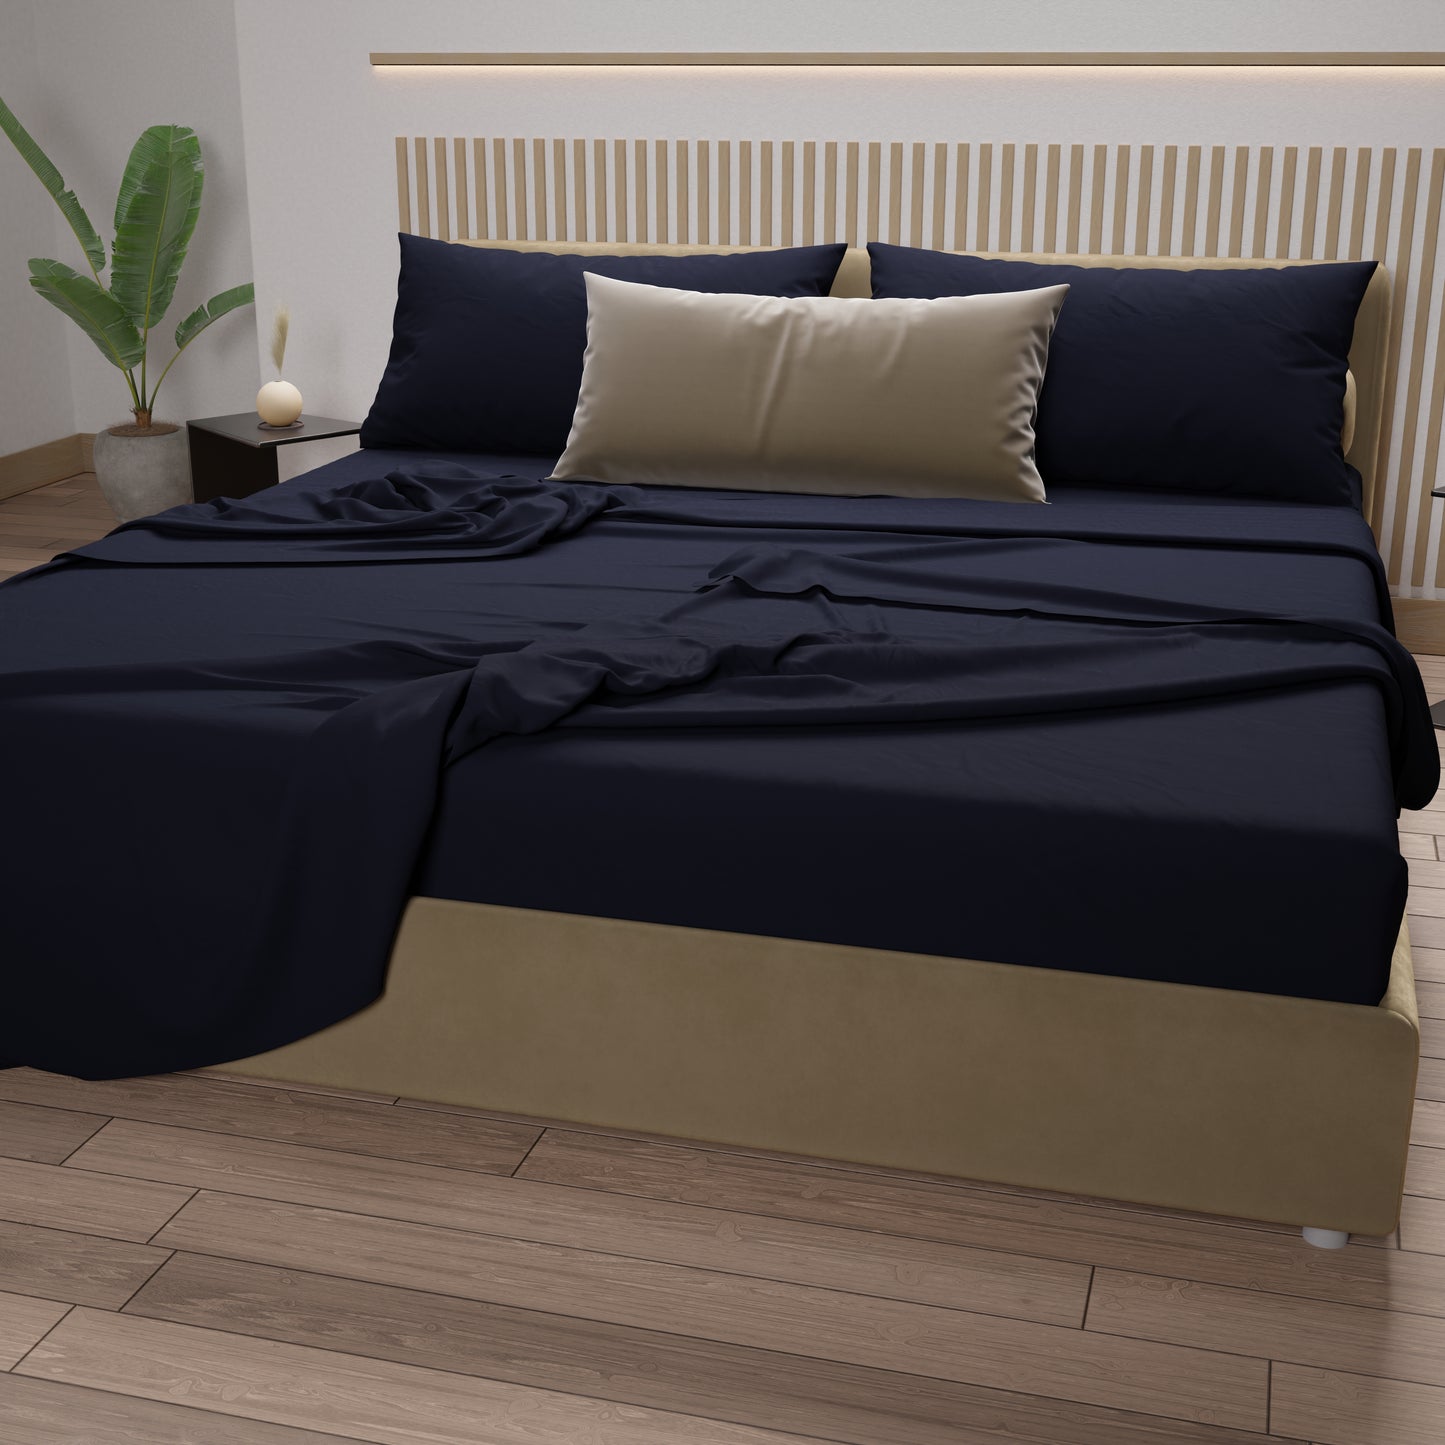 Double, Single, Single and Half Sheets, 100% Cotton, Navy Blue